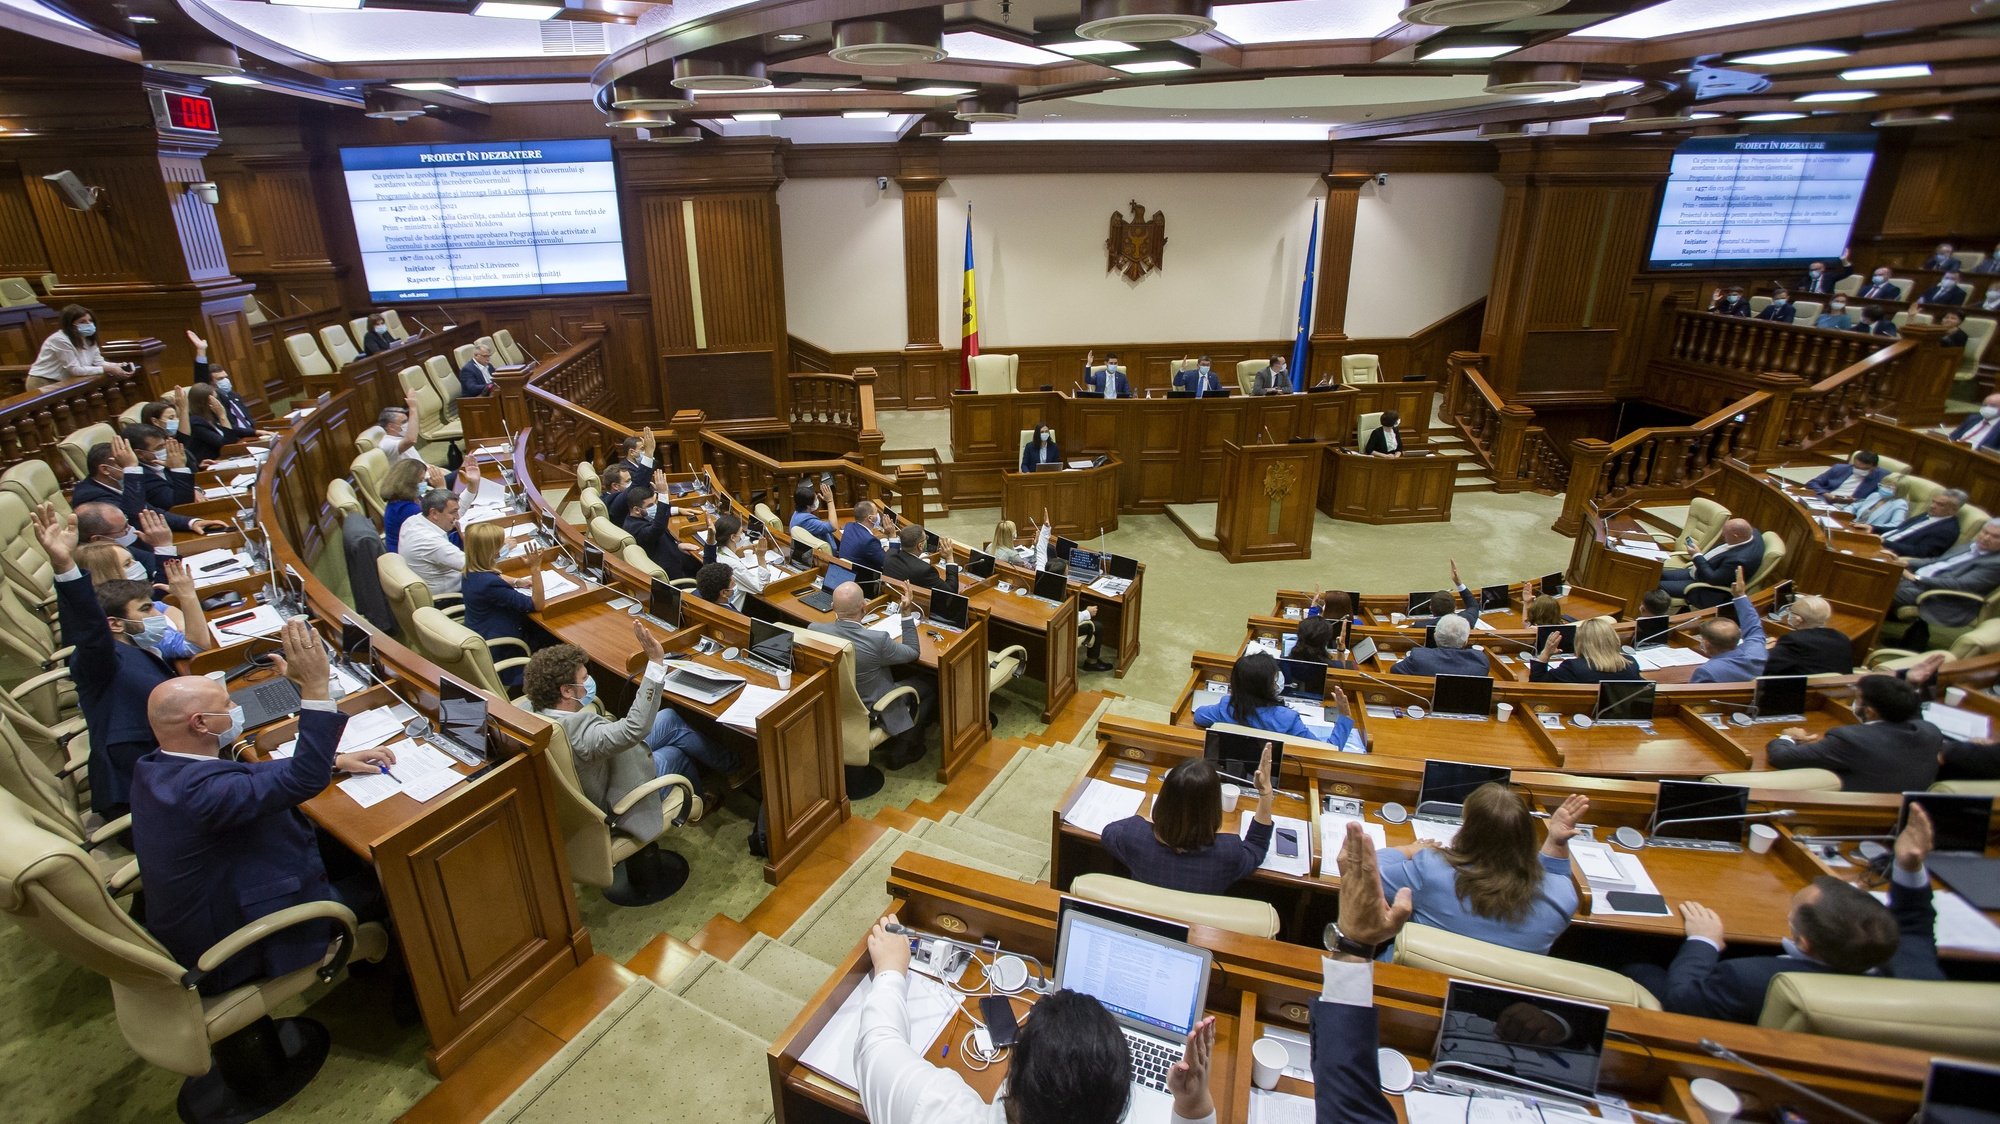 epa09401521 Members of Parliament vote during a special session, in Chisinau, Moldova, 06 August 2021. Moldova&#039;s parliament held a special session to grant the vote of confidence to the new government and to approve its program.  EPA/DUMITRU DORU